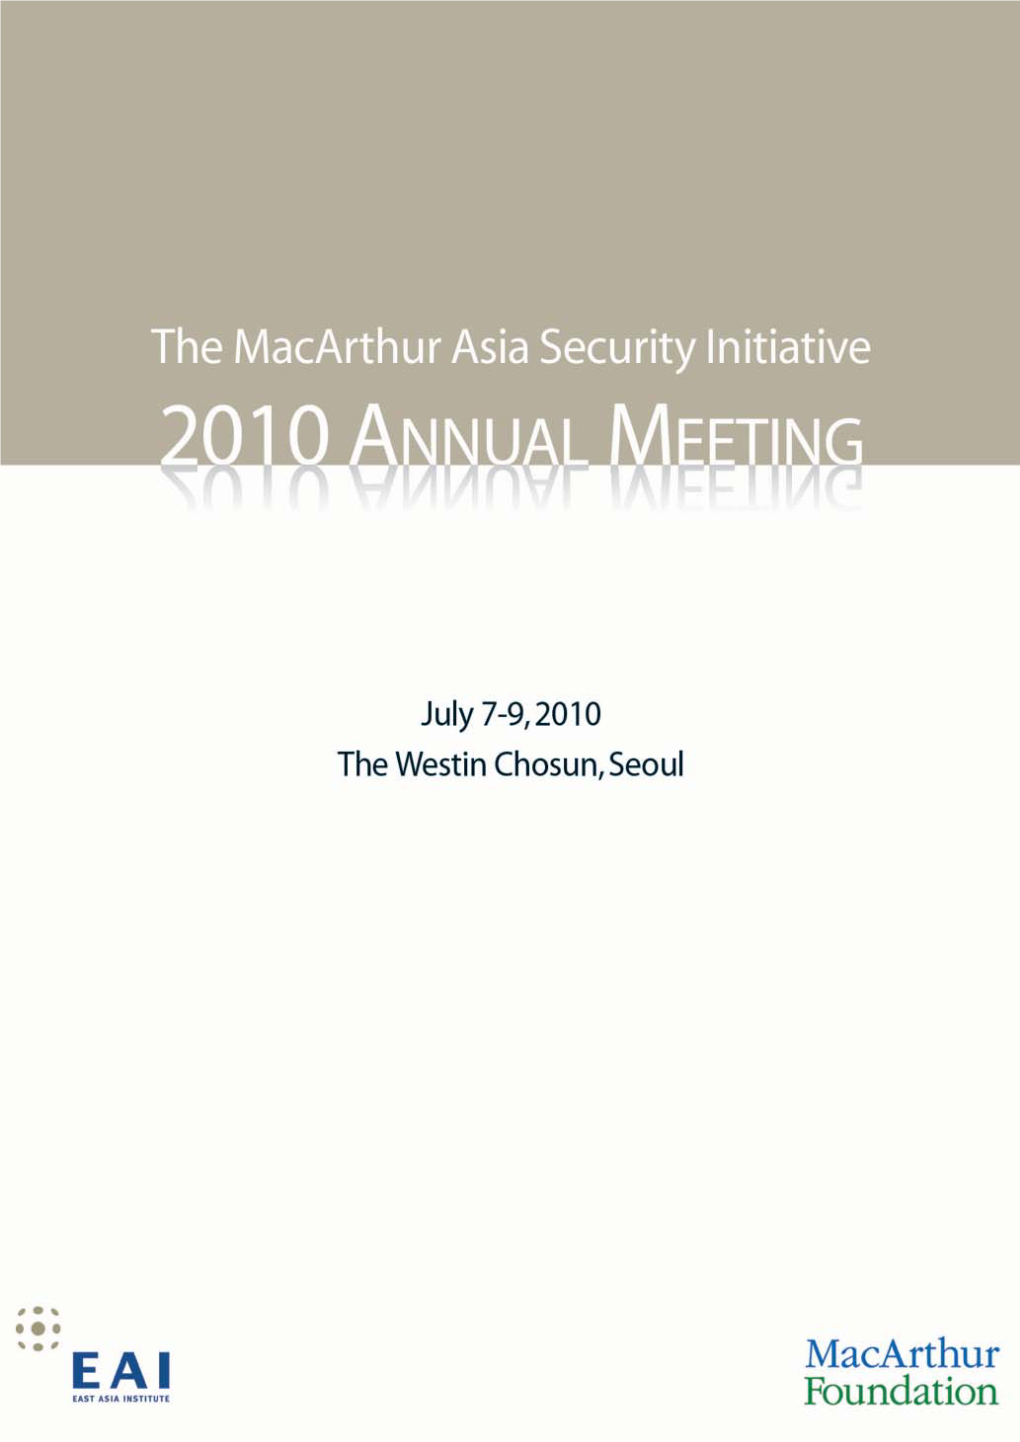 Macarthur Foundation Asia Security Initiative (MASI) Demonstrates Increasing Cooperation in Other Important Areas